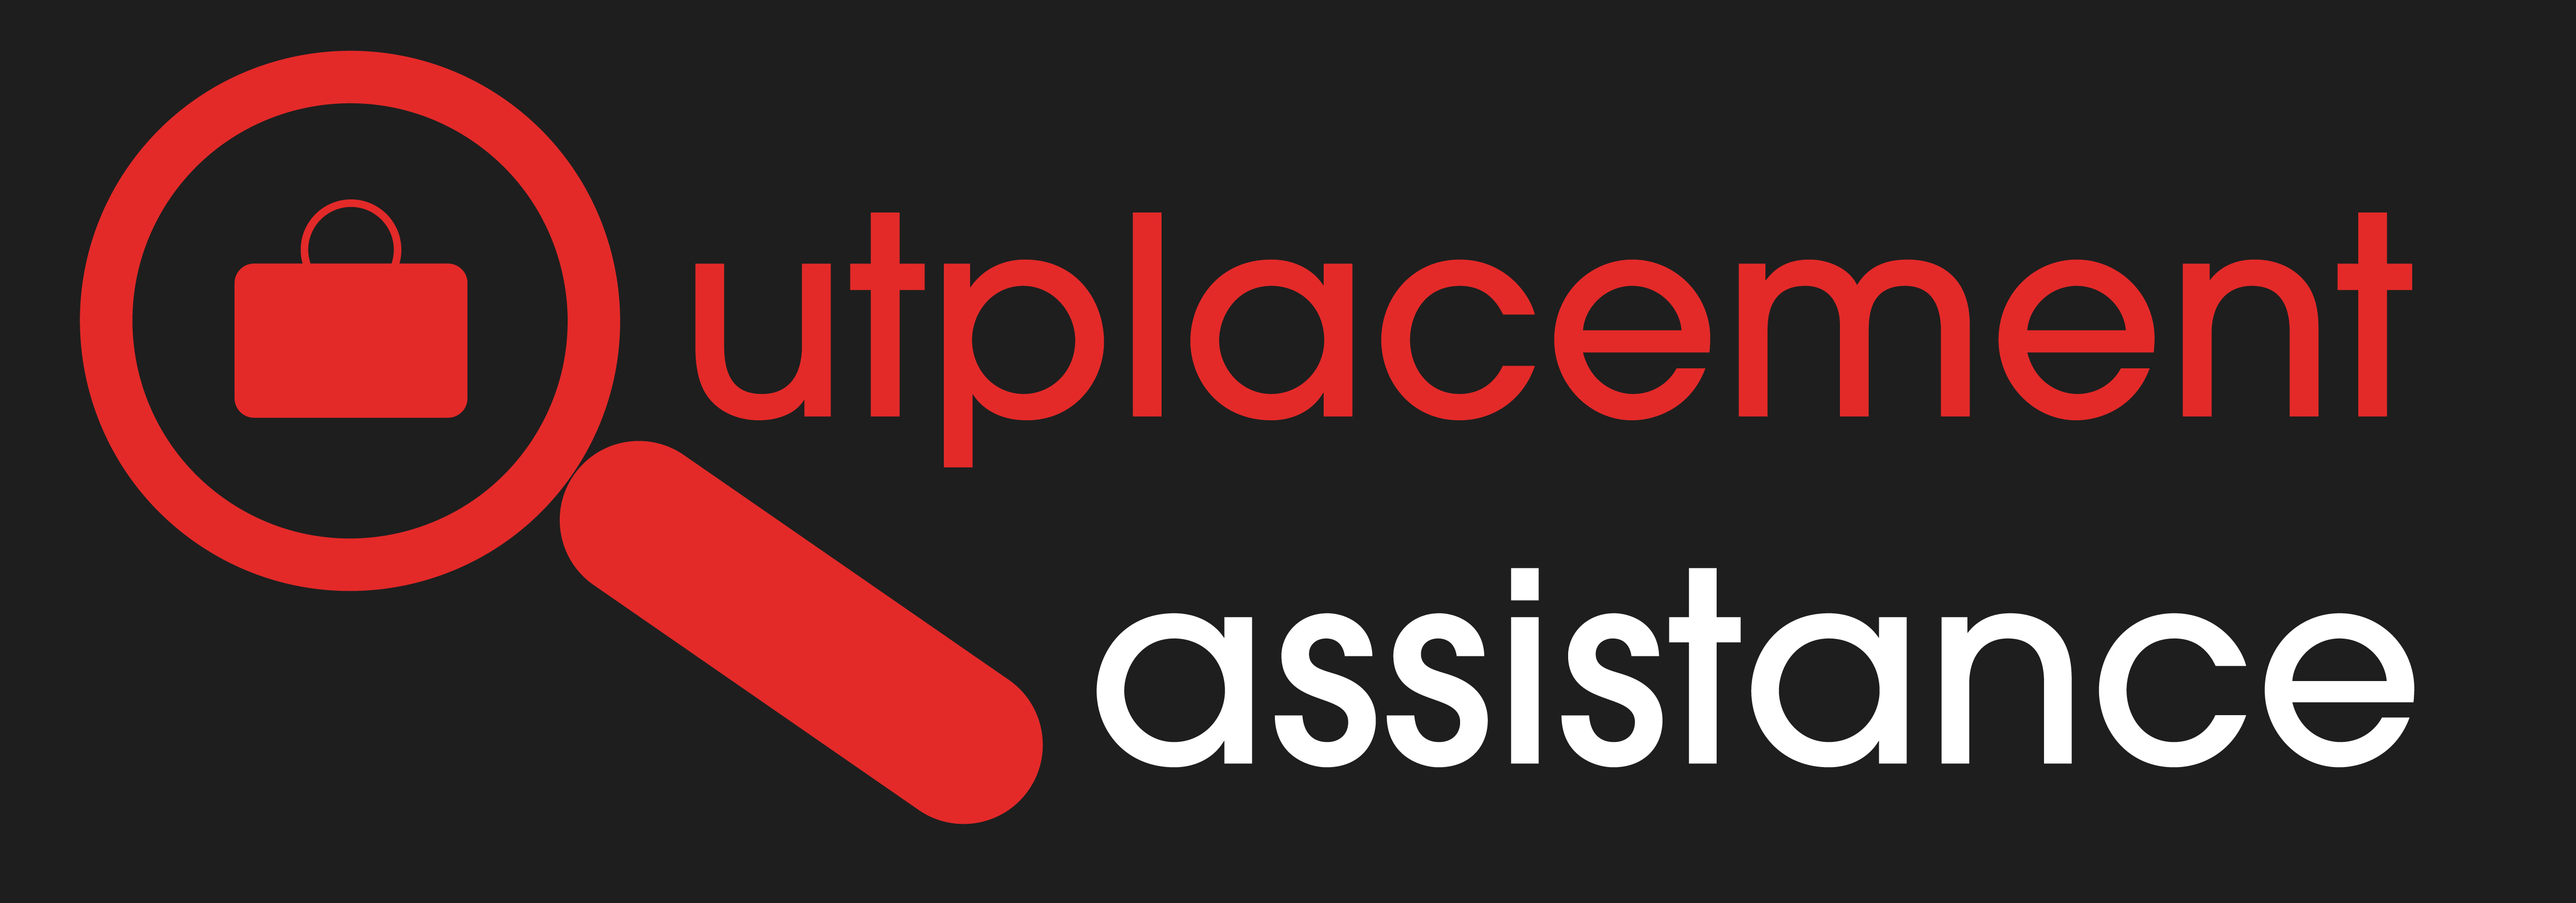 Logo of Outplacement Assistance